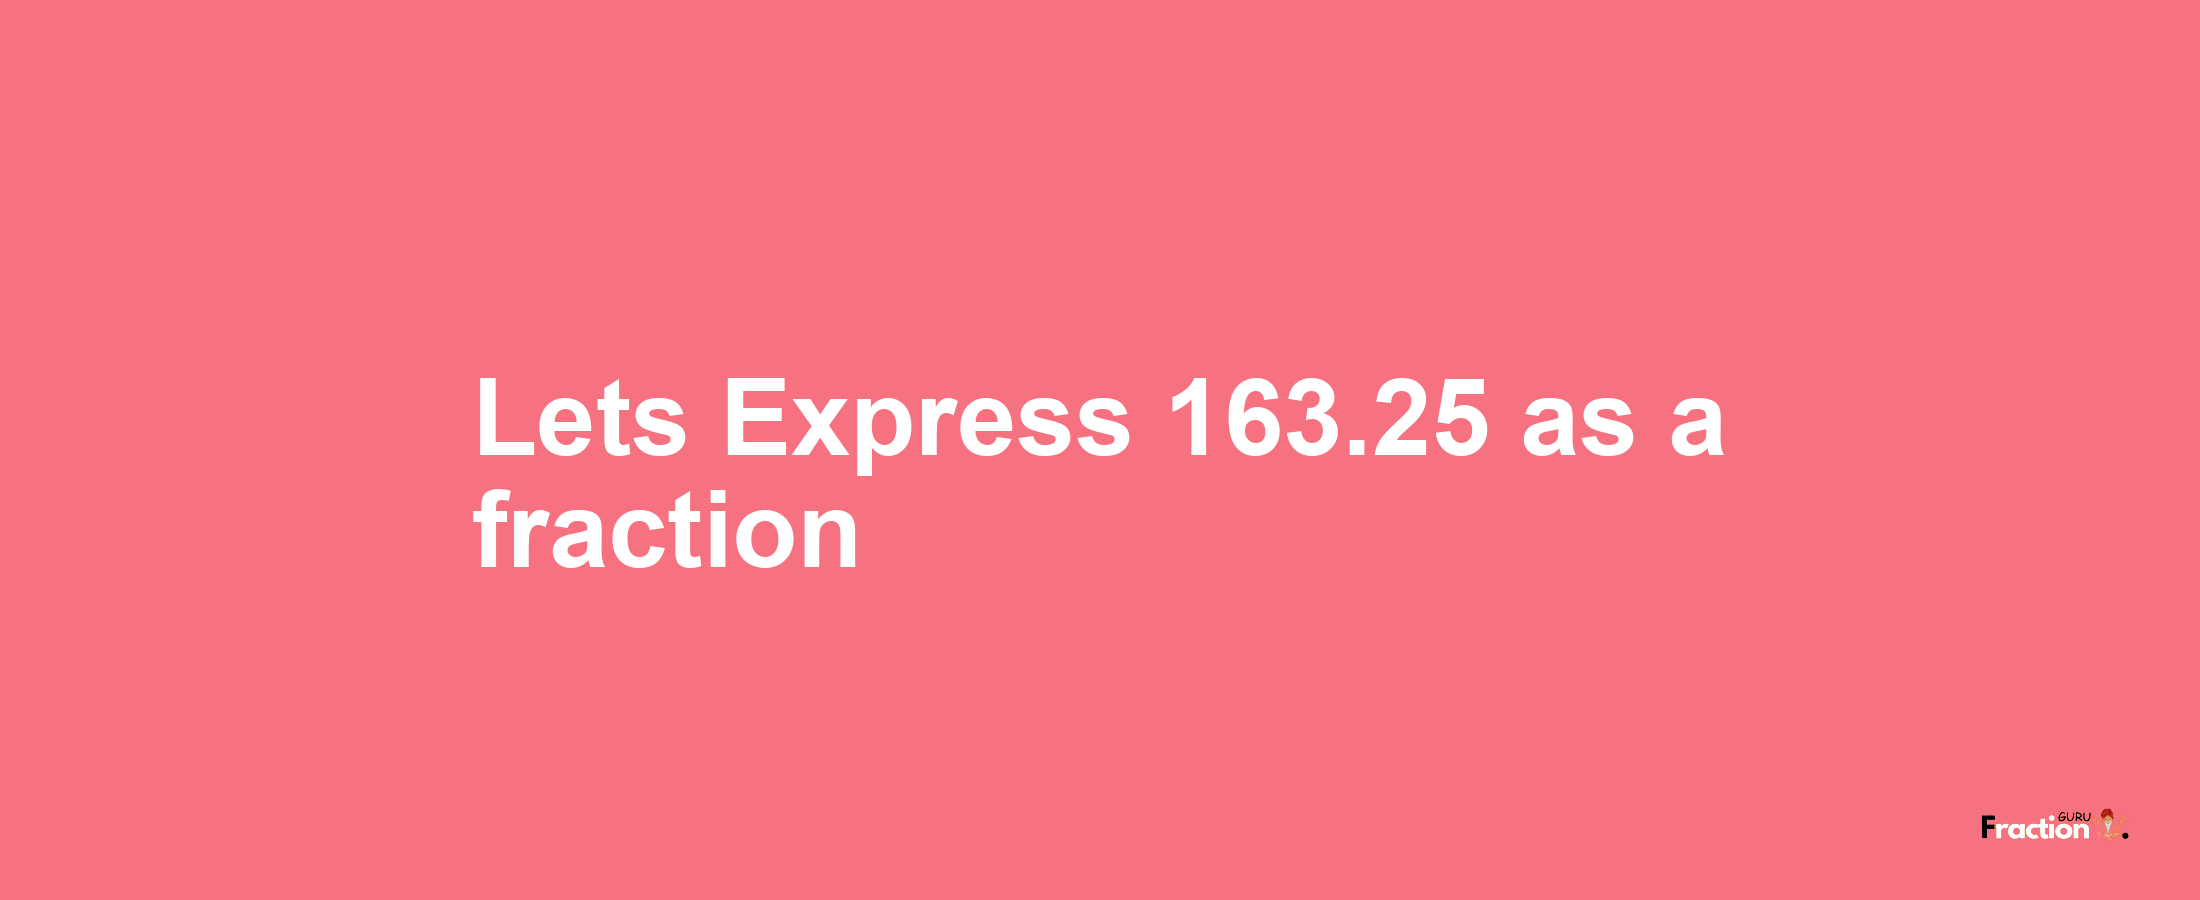 Lets Express 163.25 as afraction